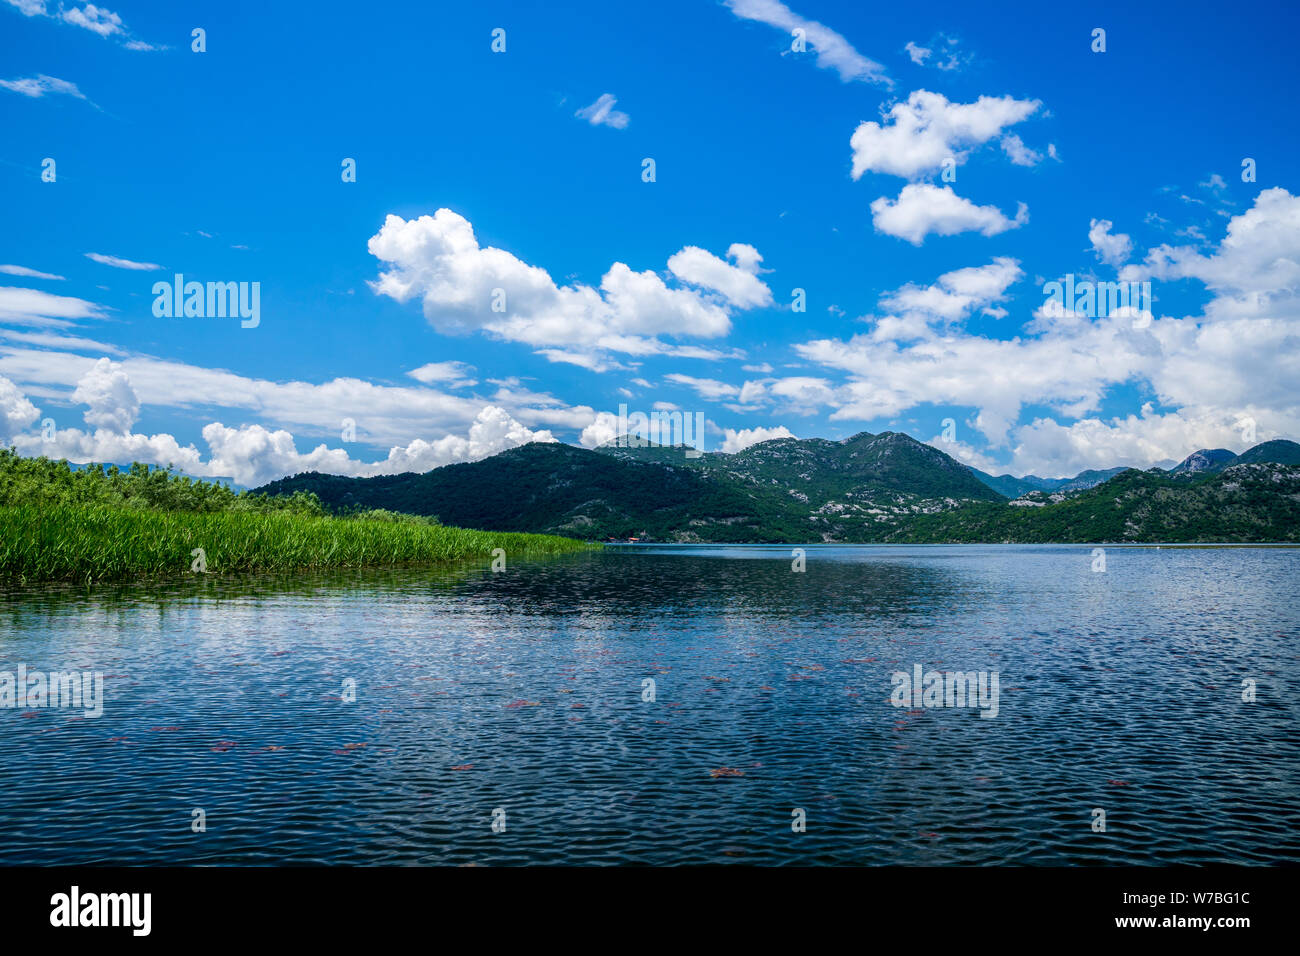 Montenegro, Boat trip on skadar lake alongside green islands of reed plants surrounded by majestic mountains and hills in national park nature landsca Stock Photo